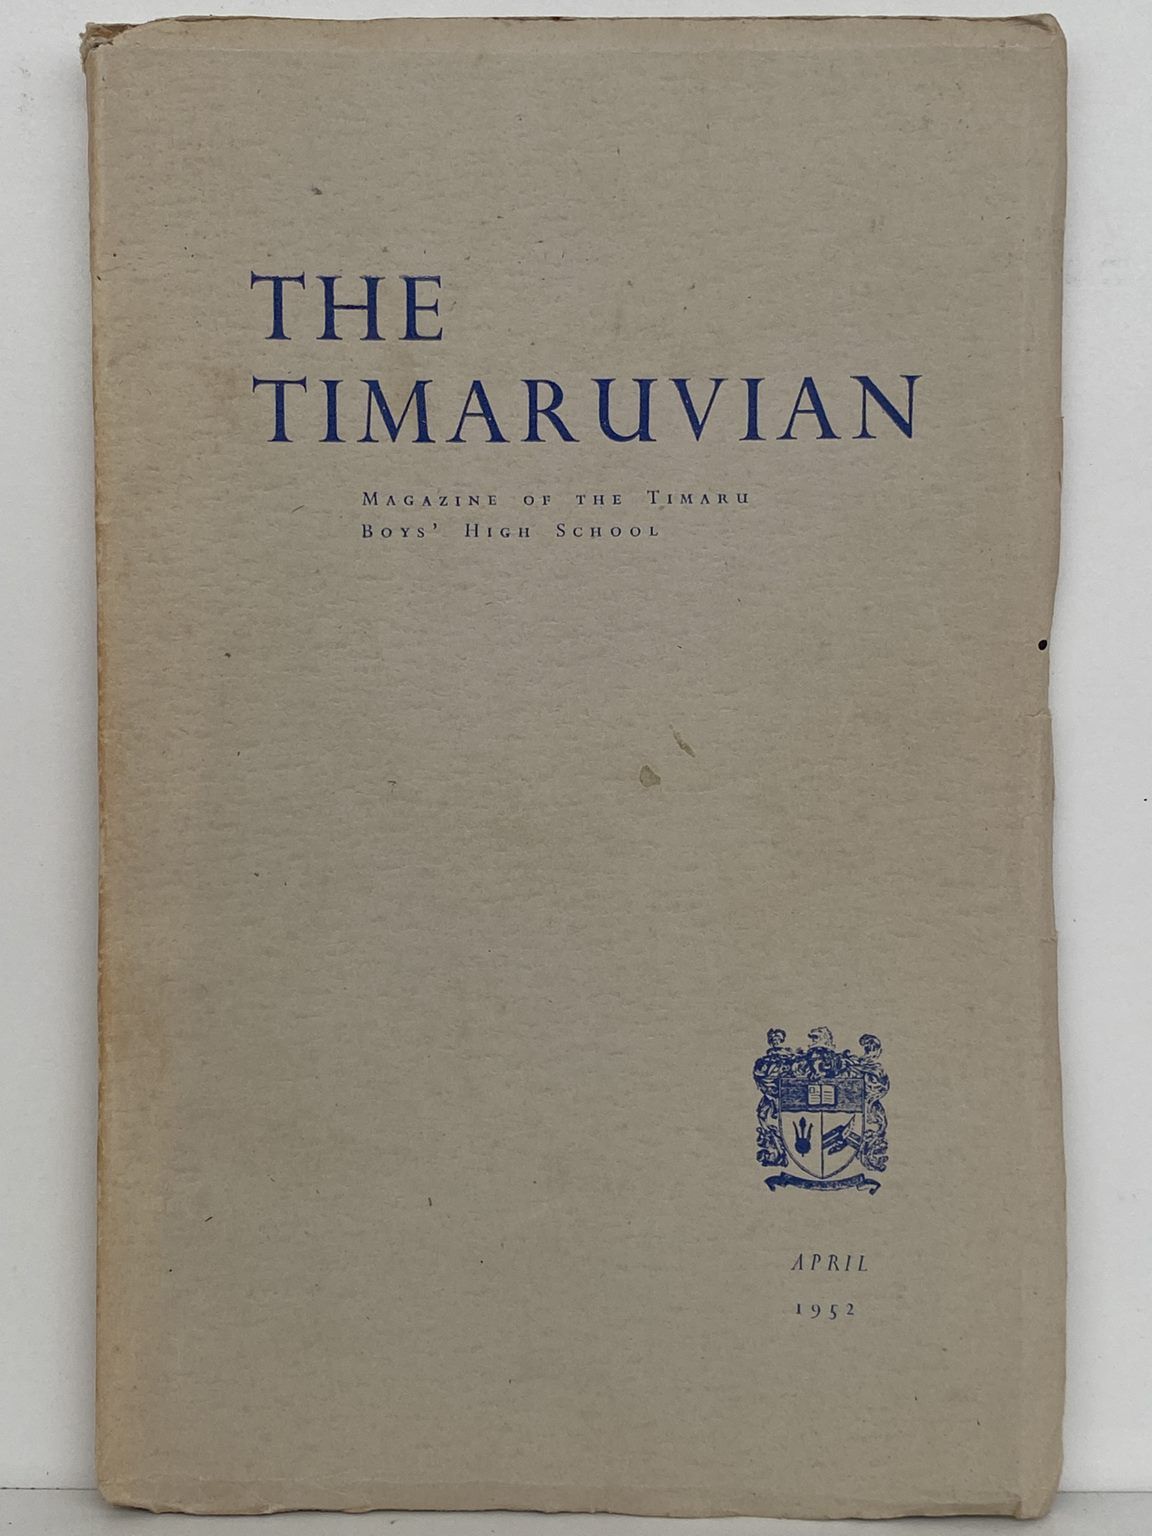 THE TIMARUVIAN: Magazine of the Timaru Boys' High School and its Old Boys' Association 1952